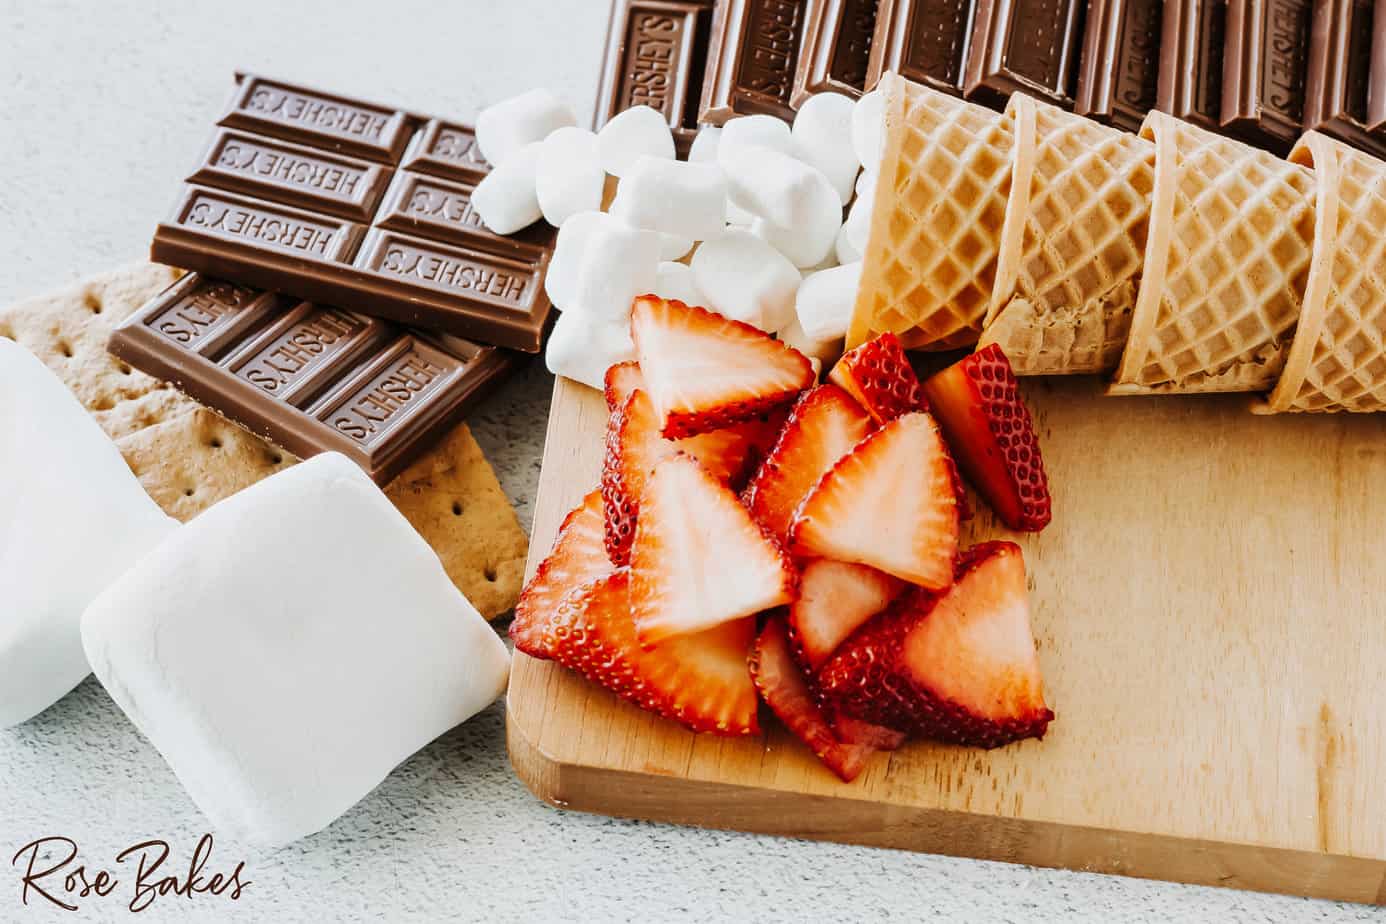 add waffle cones filled with mini marshmallows and sliced strawberries to the side next to the hershey bars